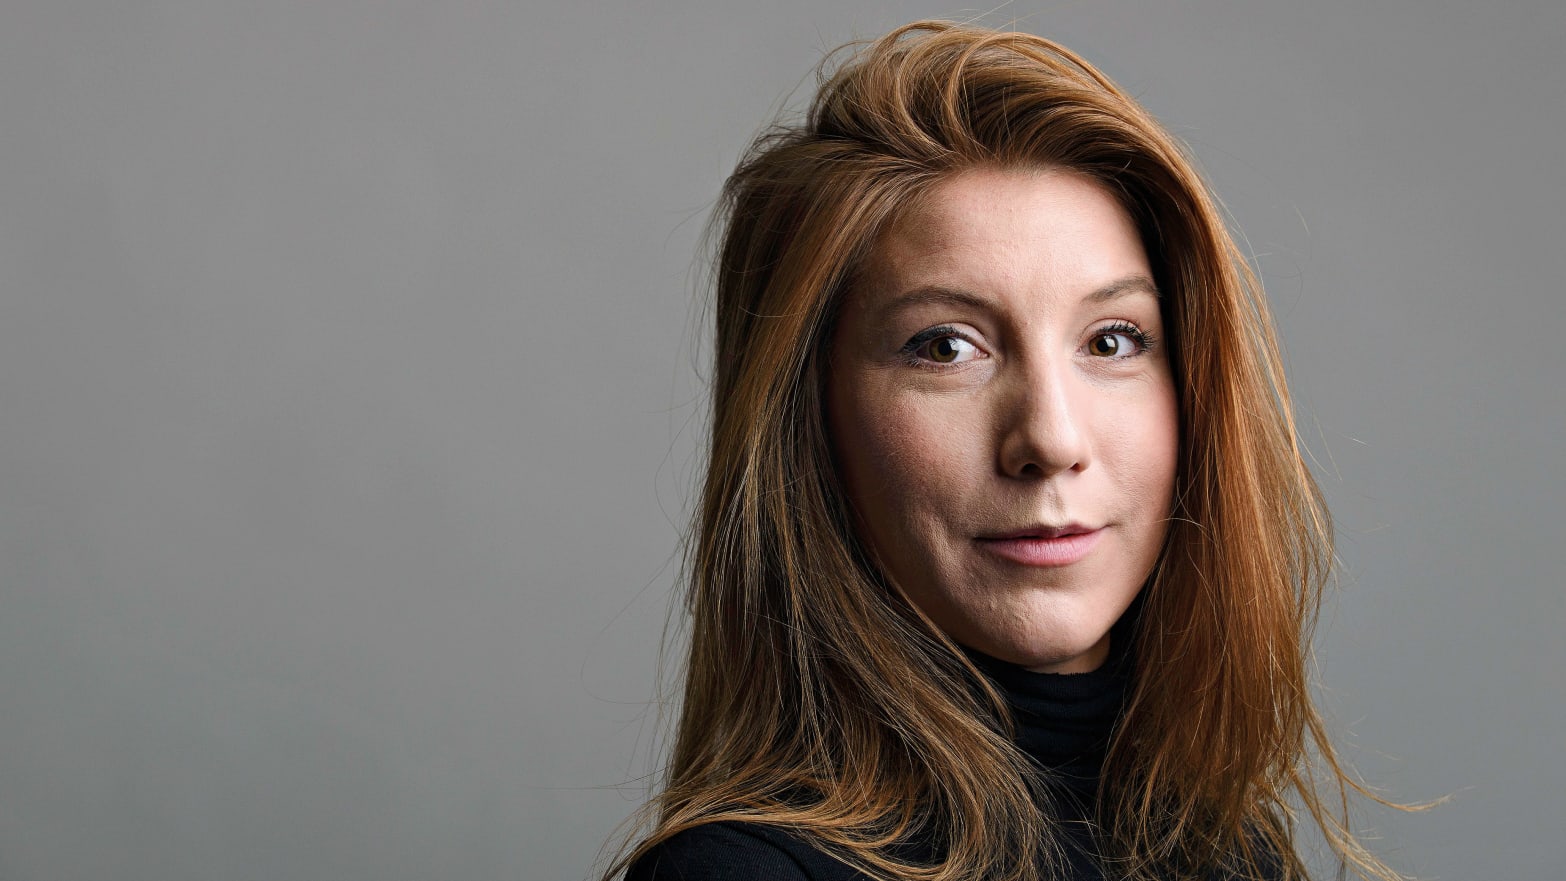 Journalist Kim Walls, who disappeared reporting on the home-made submarine "UC3 Nautilus", built by Danish inventor Peter Madsen, who is charged with killing the Swedish journalist